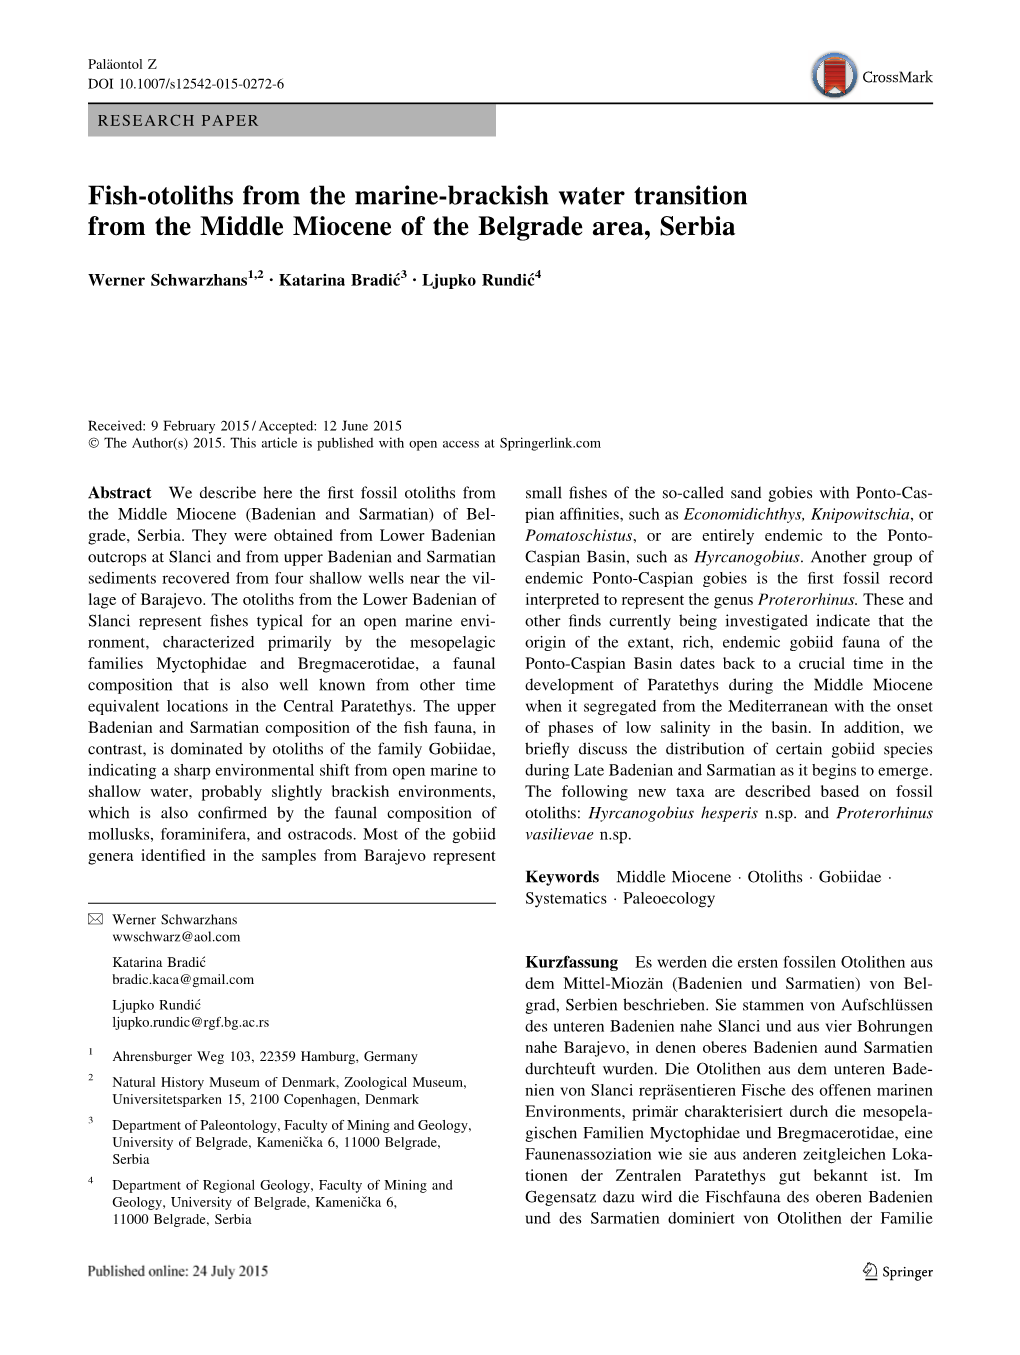 Fish-Otoliths from the Marine-Brackish Water Transition from the Middle Miocene of the Belgrade Area, Serbia